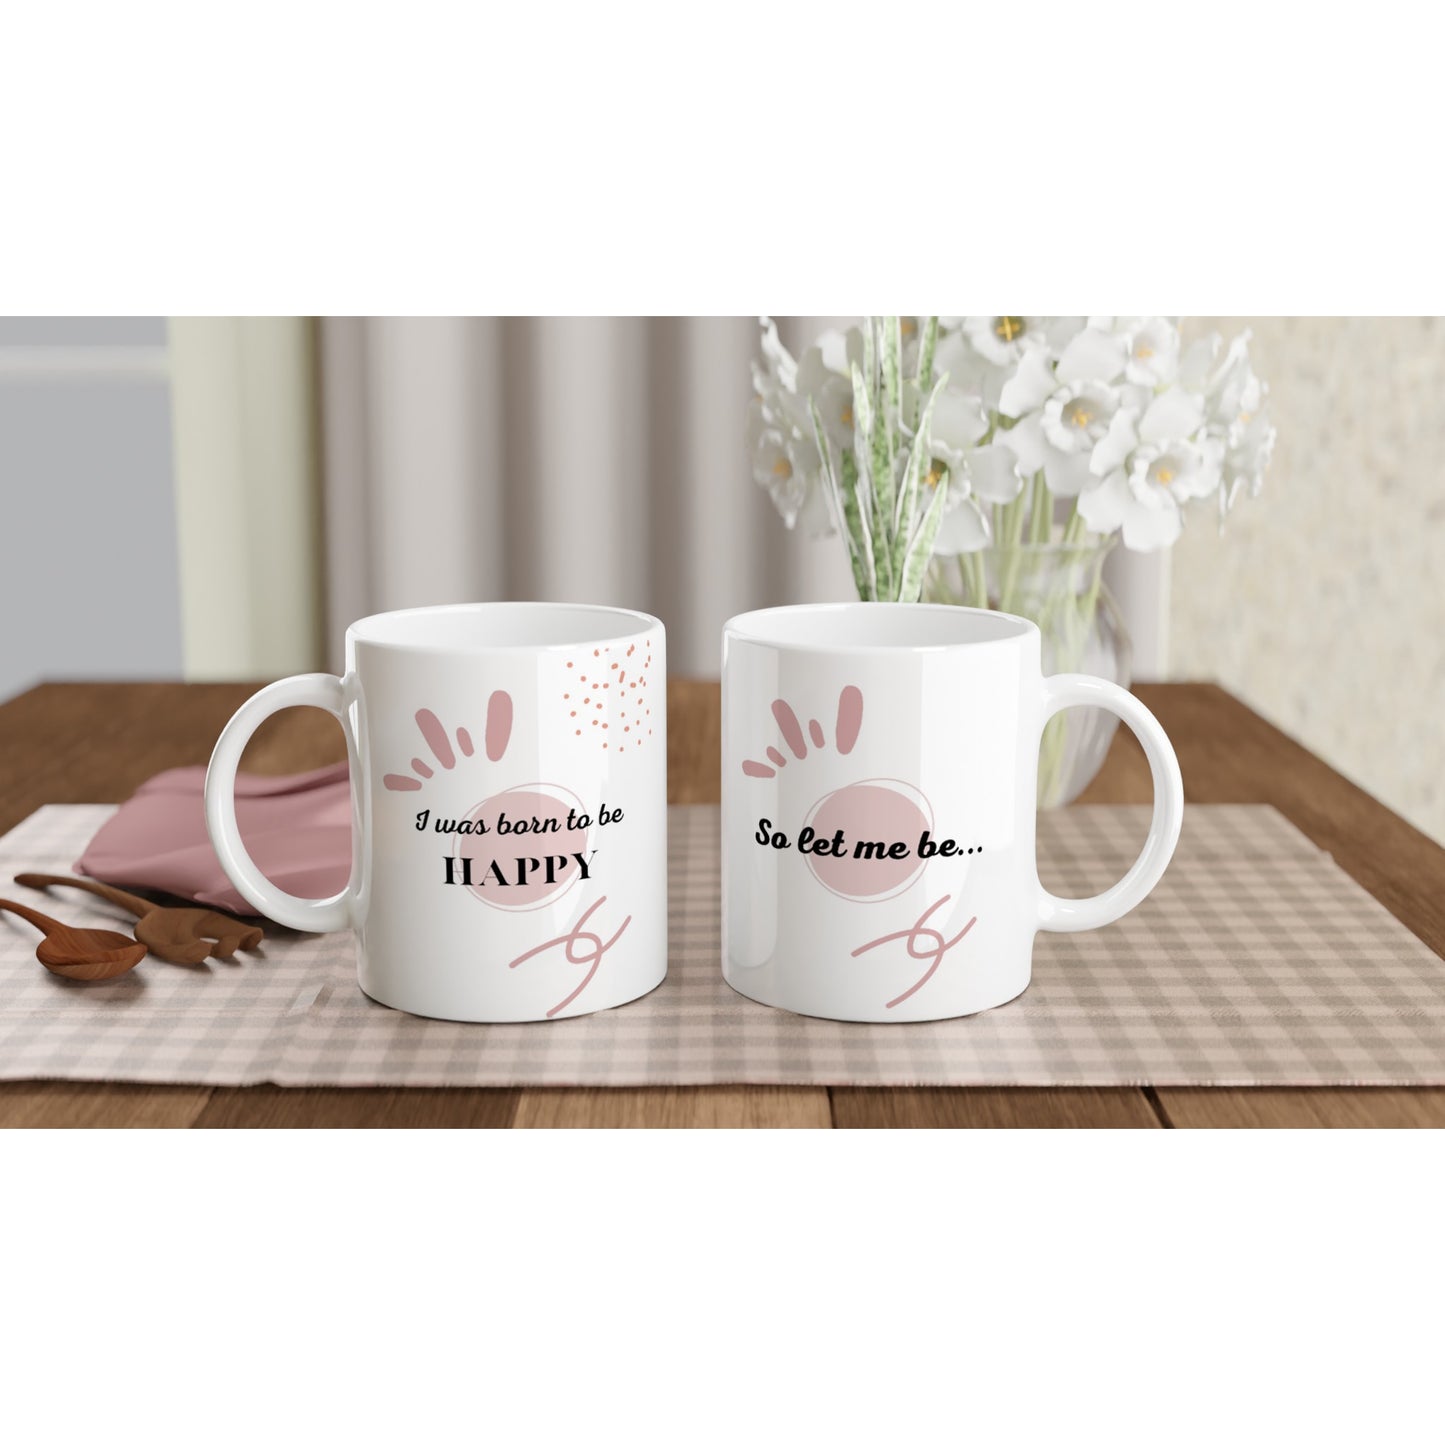 Positive Affirmation White glossy mug - "I was born to be Happy, So let me be!